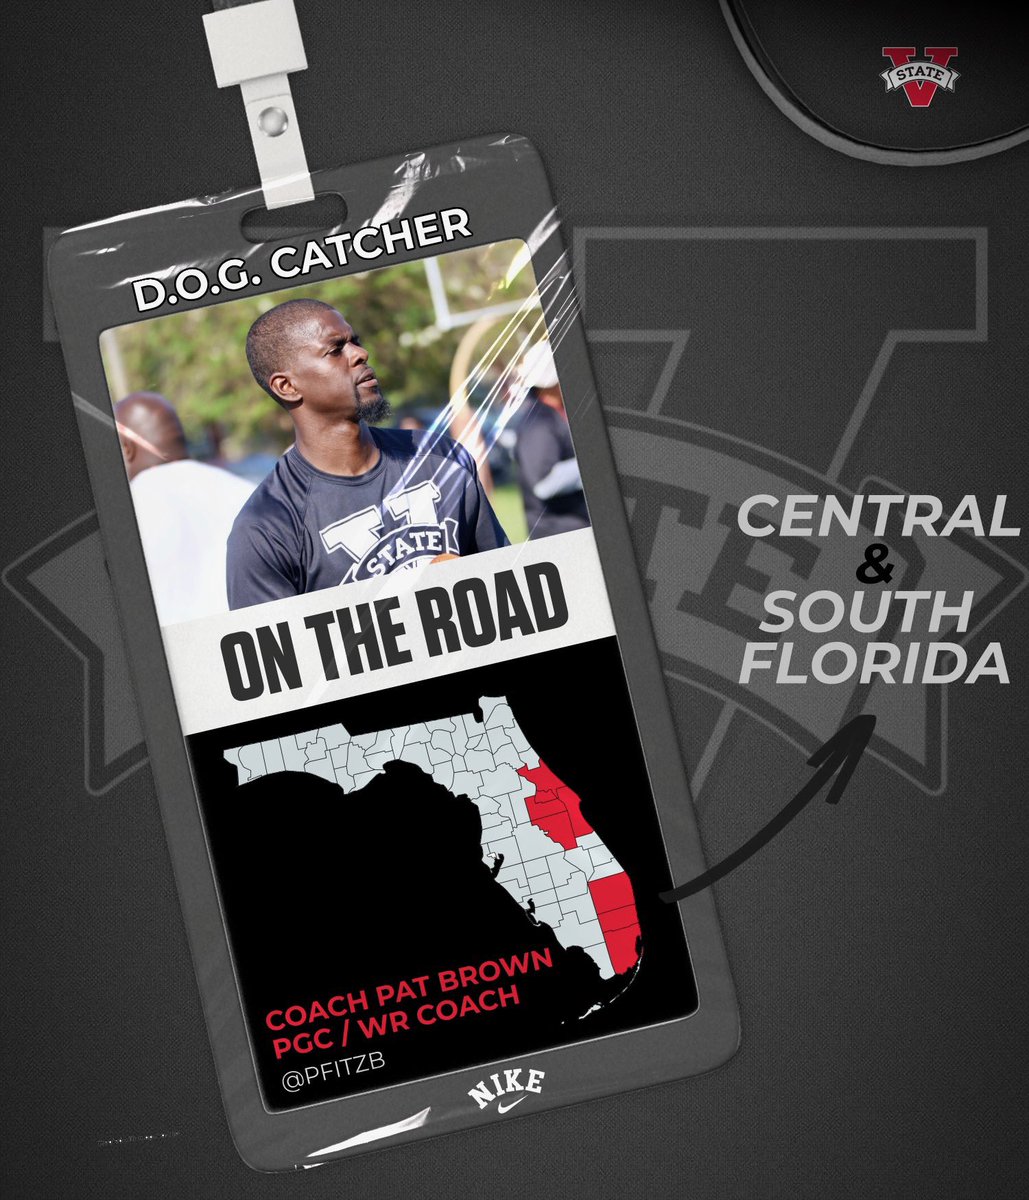 ⚫️ #TitleTown 🔴 👀 For the next two weeks back at the Cribb 🌴 Recruiting Next Week- South Florida Apr29-May3 FollowingWeek-Central FL May6-May10 “Rain, sleet, or snow Blazers gotta go” #WTS